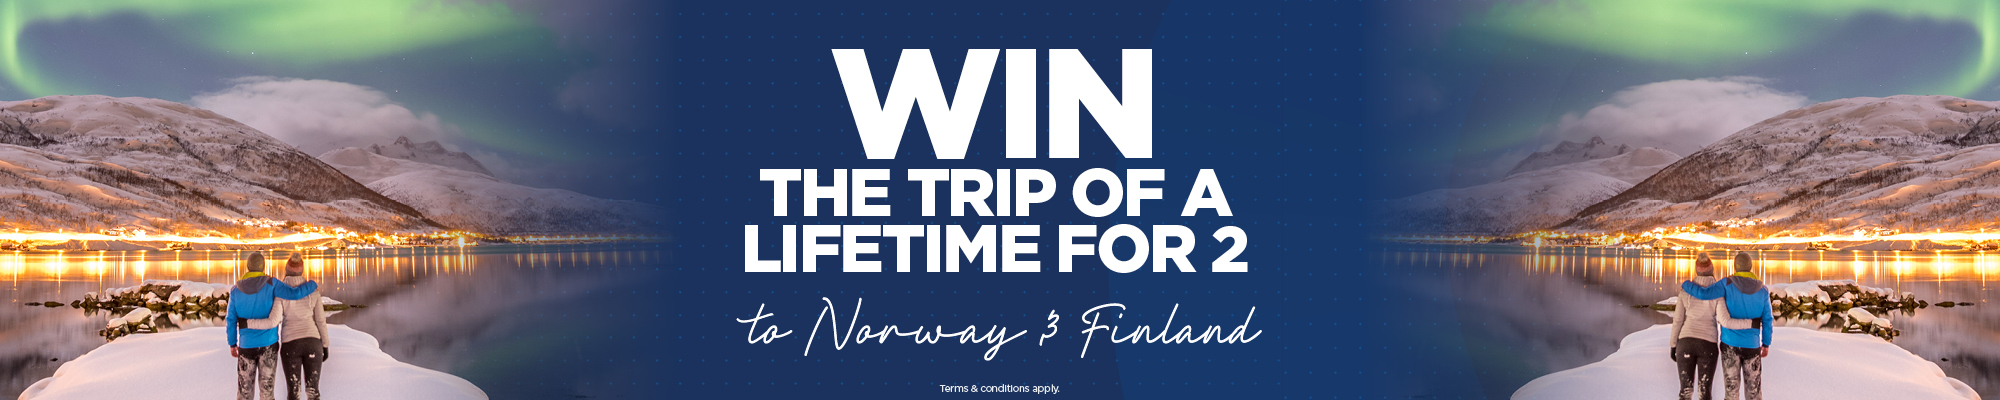 Win the trip of a lifetime for 2 to Norway & Finland